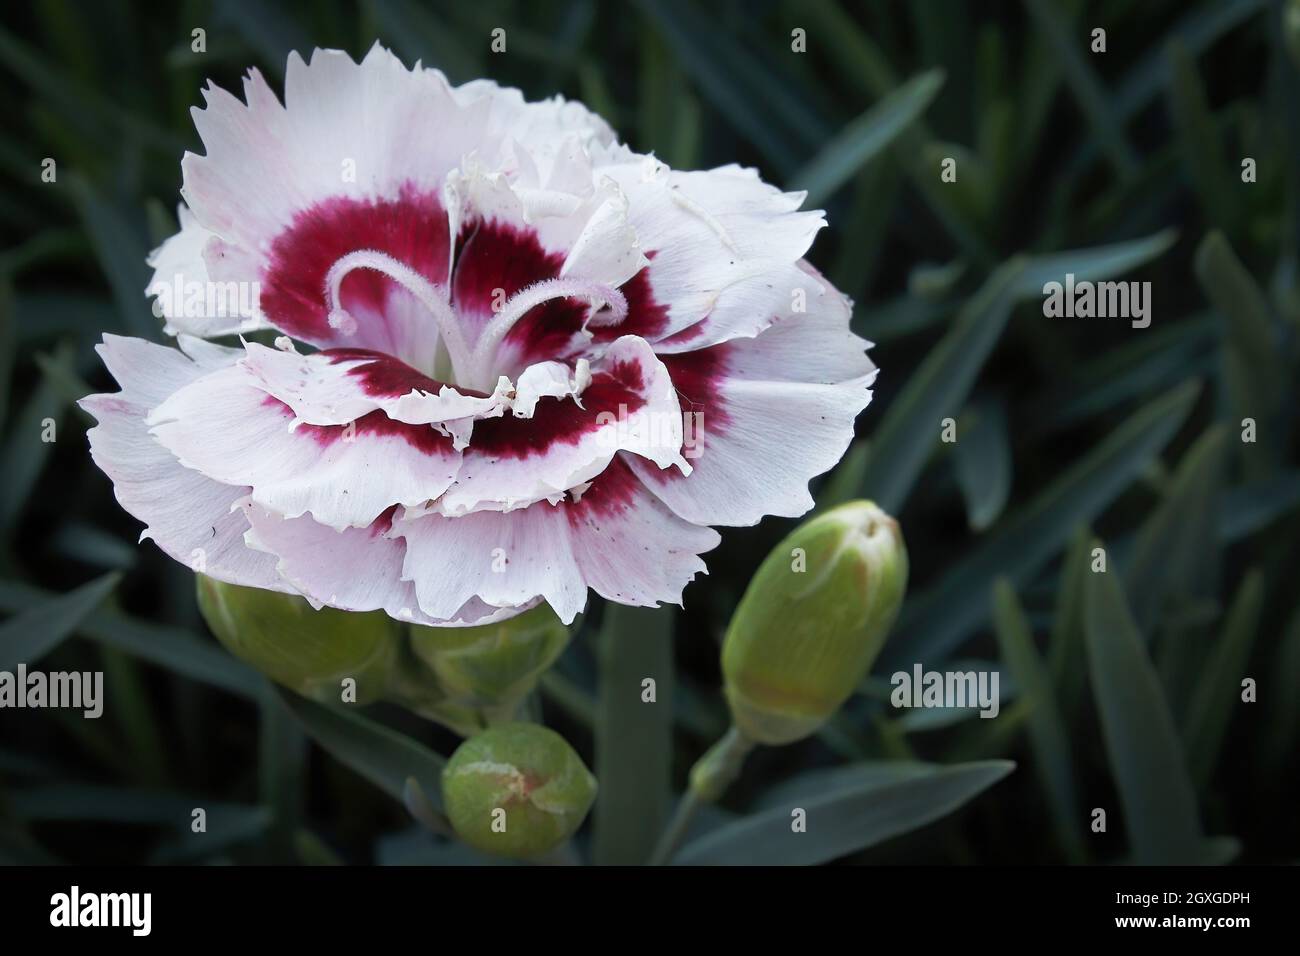 Closeup of a red and white dianthus flower in bloom. Stock Photo